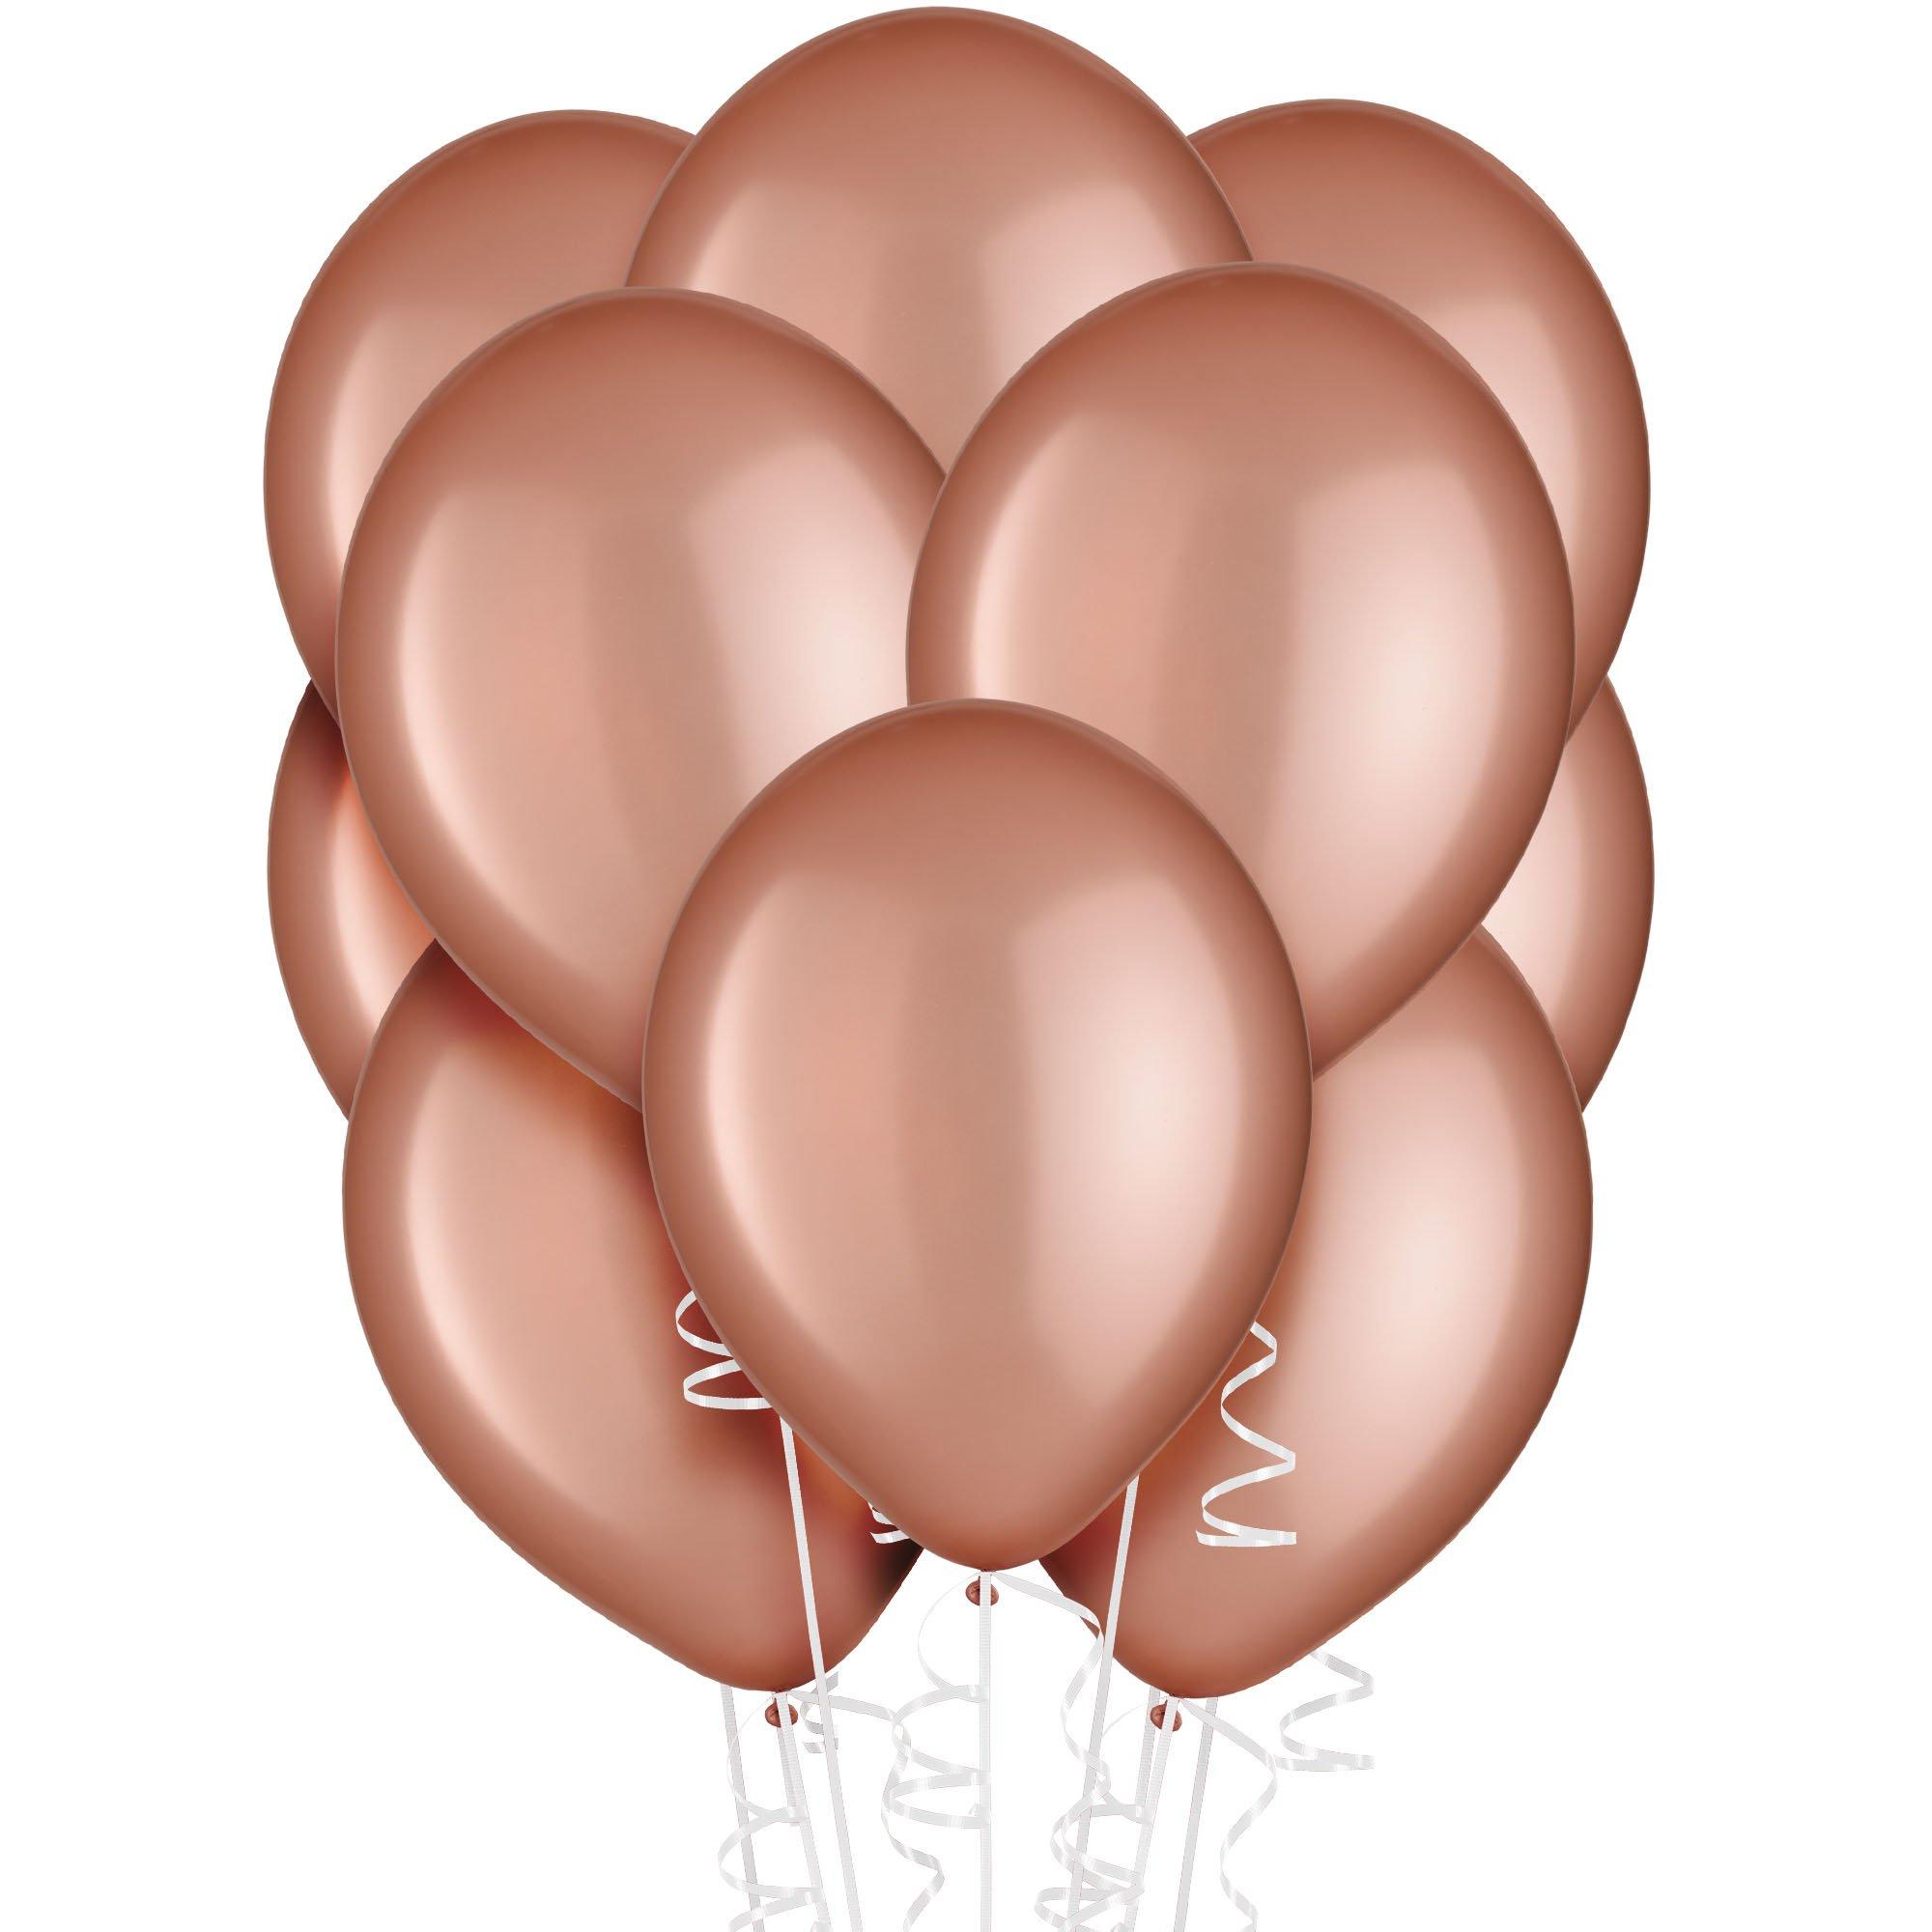 72ct, 12in, Pearl Balloons